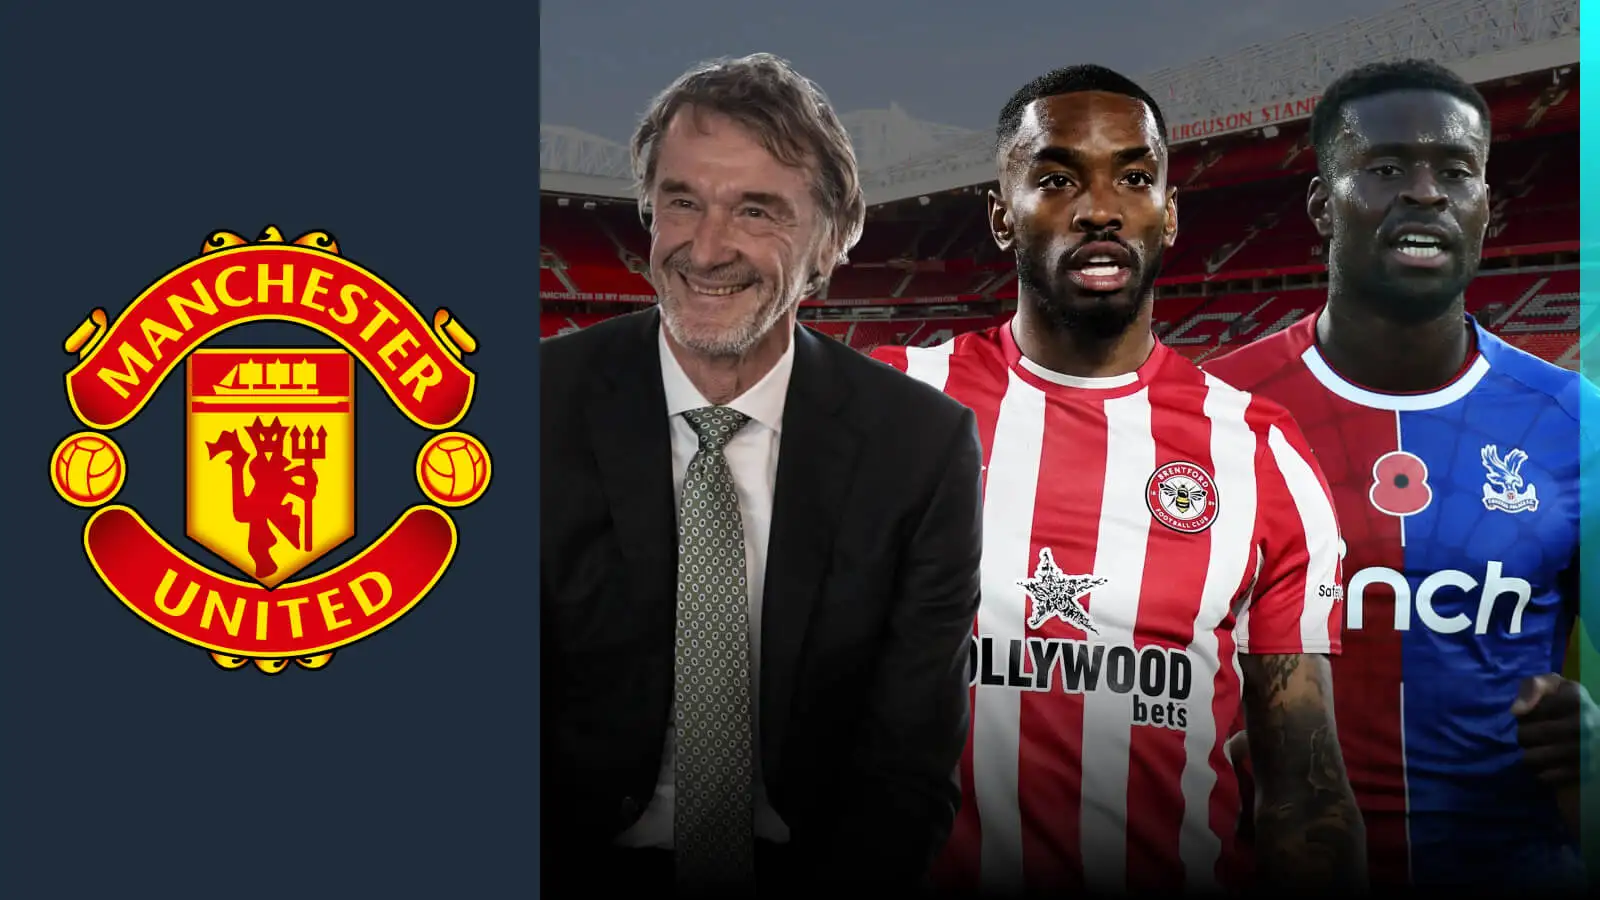 Sir Jim Ratcliffe, Ivan Toney and Marc Guehi with the Manchester United badge.